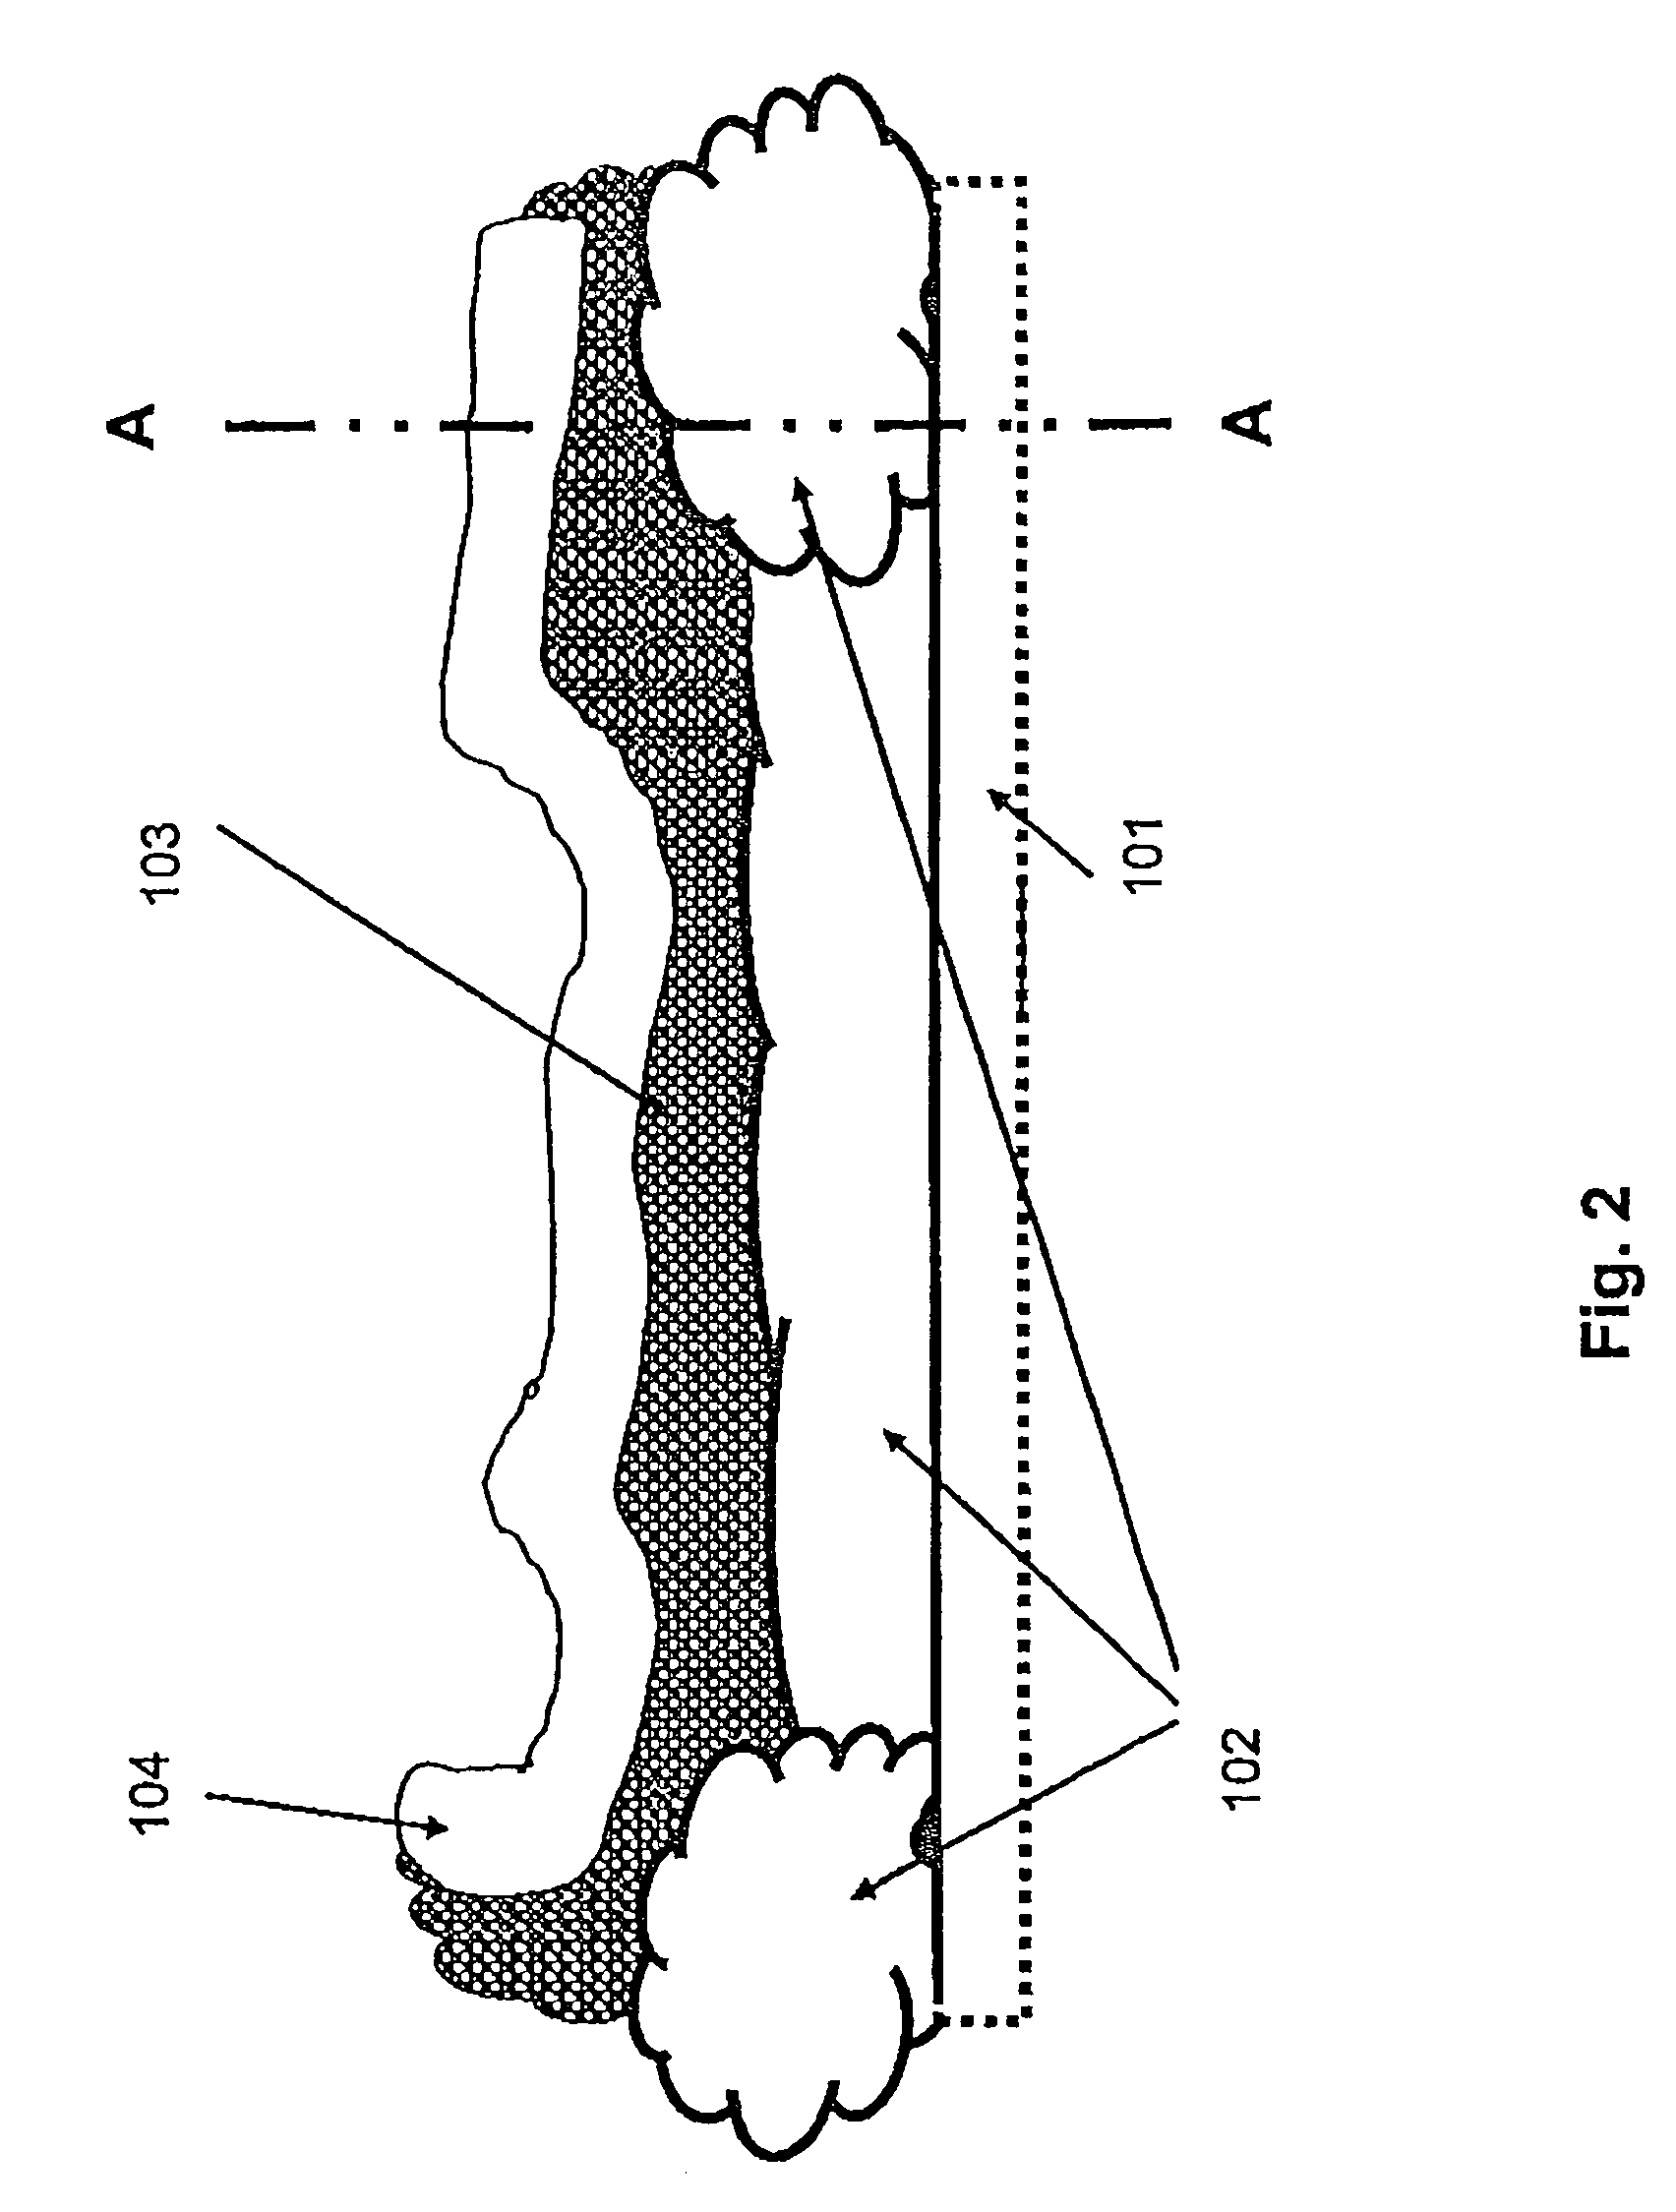 Device and method for carefully settling a patient in a defined position